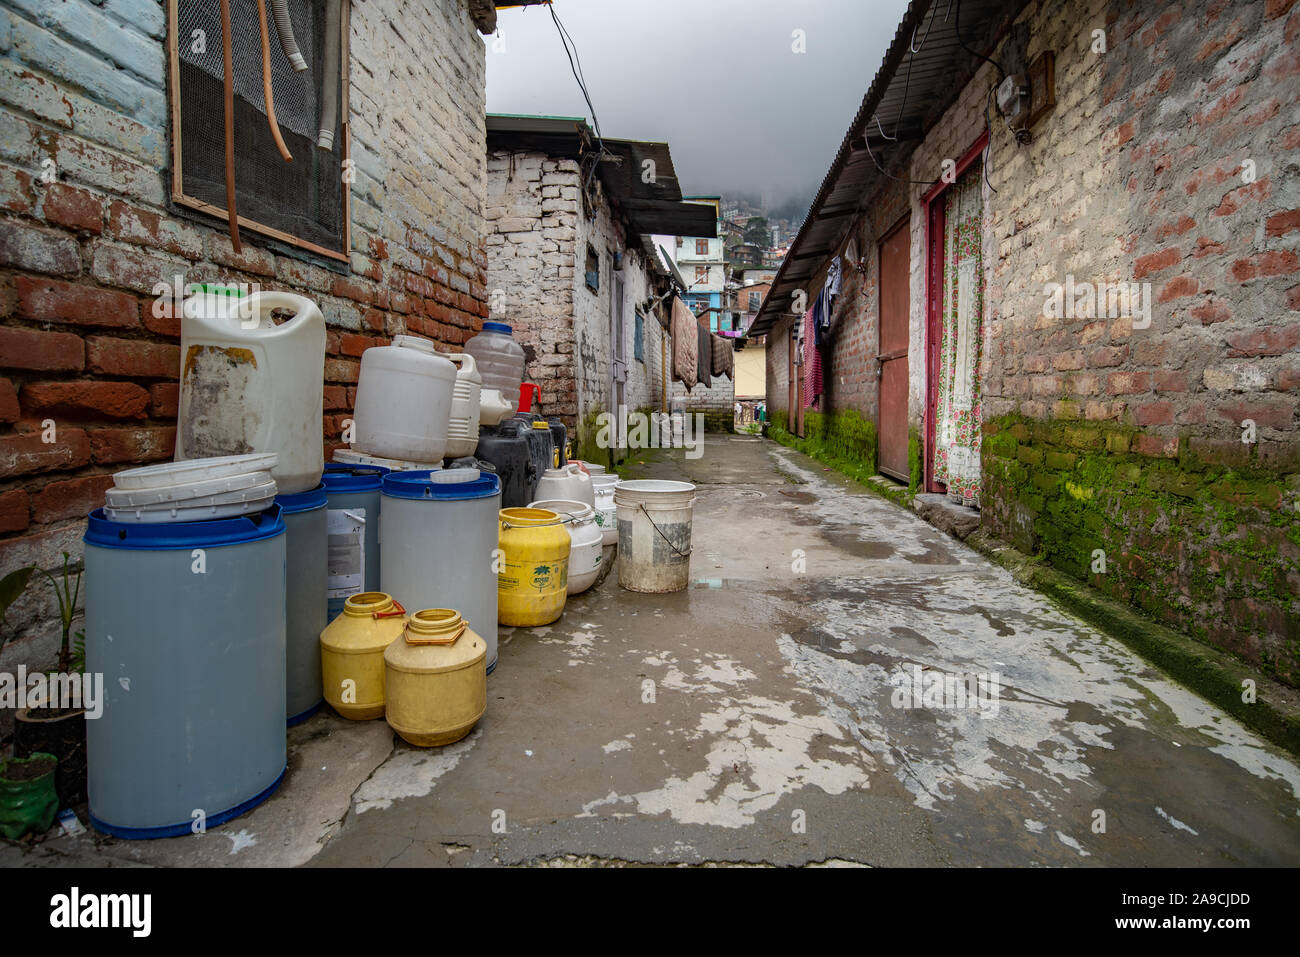 The difficulties of Shimla's residents in accessing clean drinking water is made explicit by these plastic containers outside the home Stock Photo